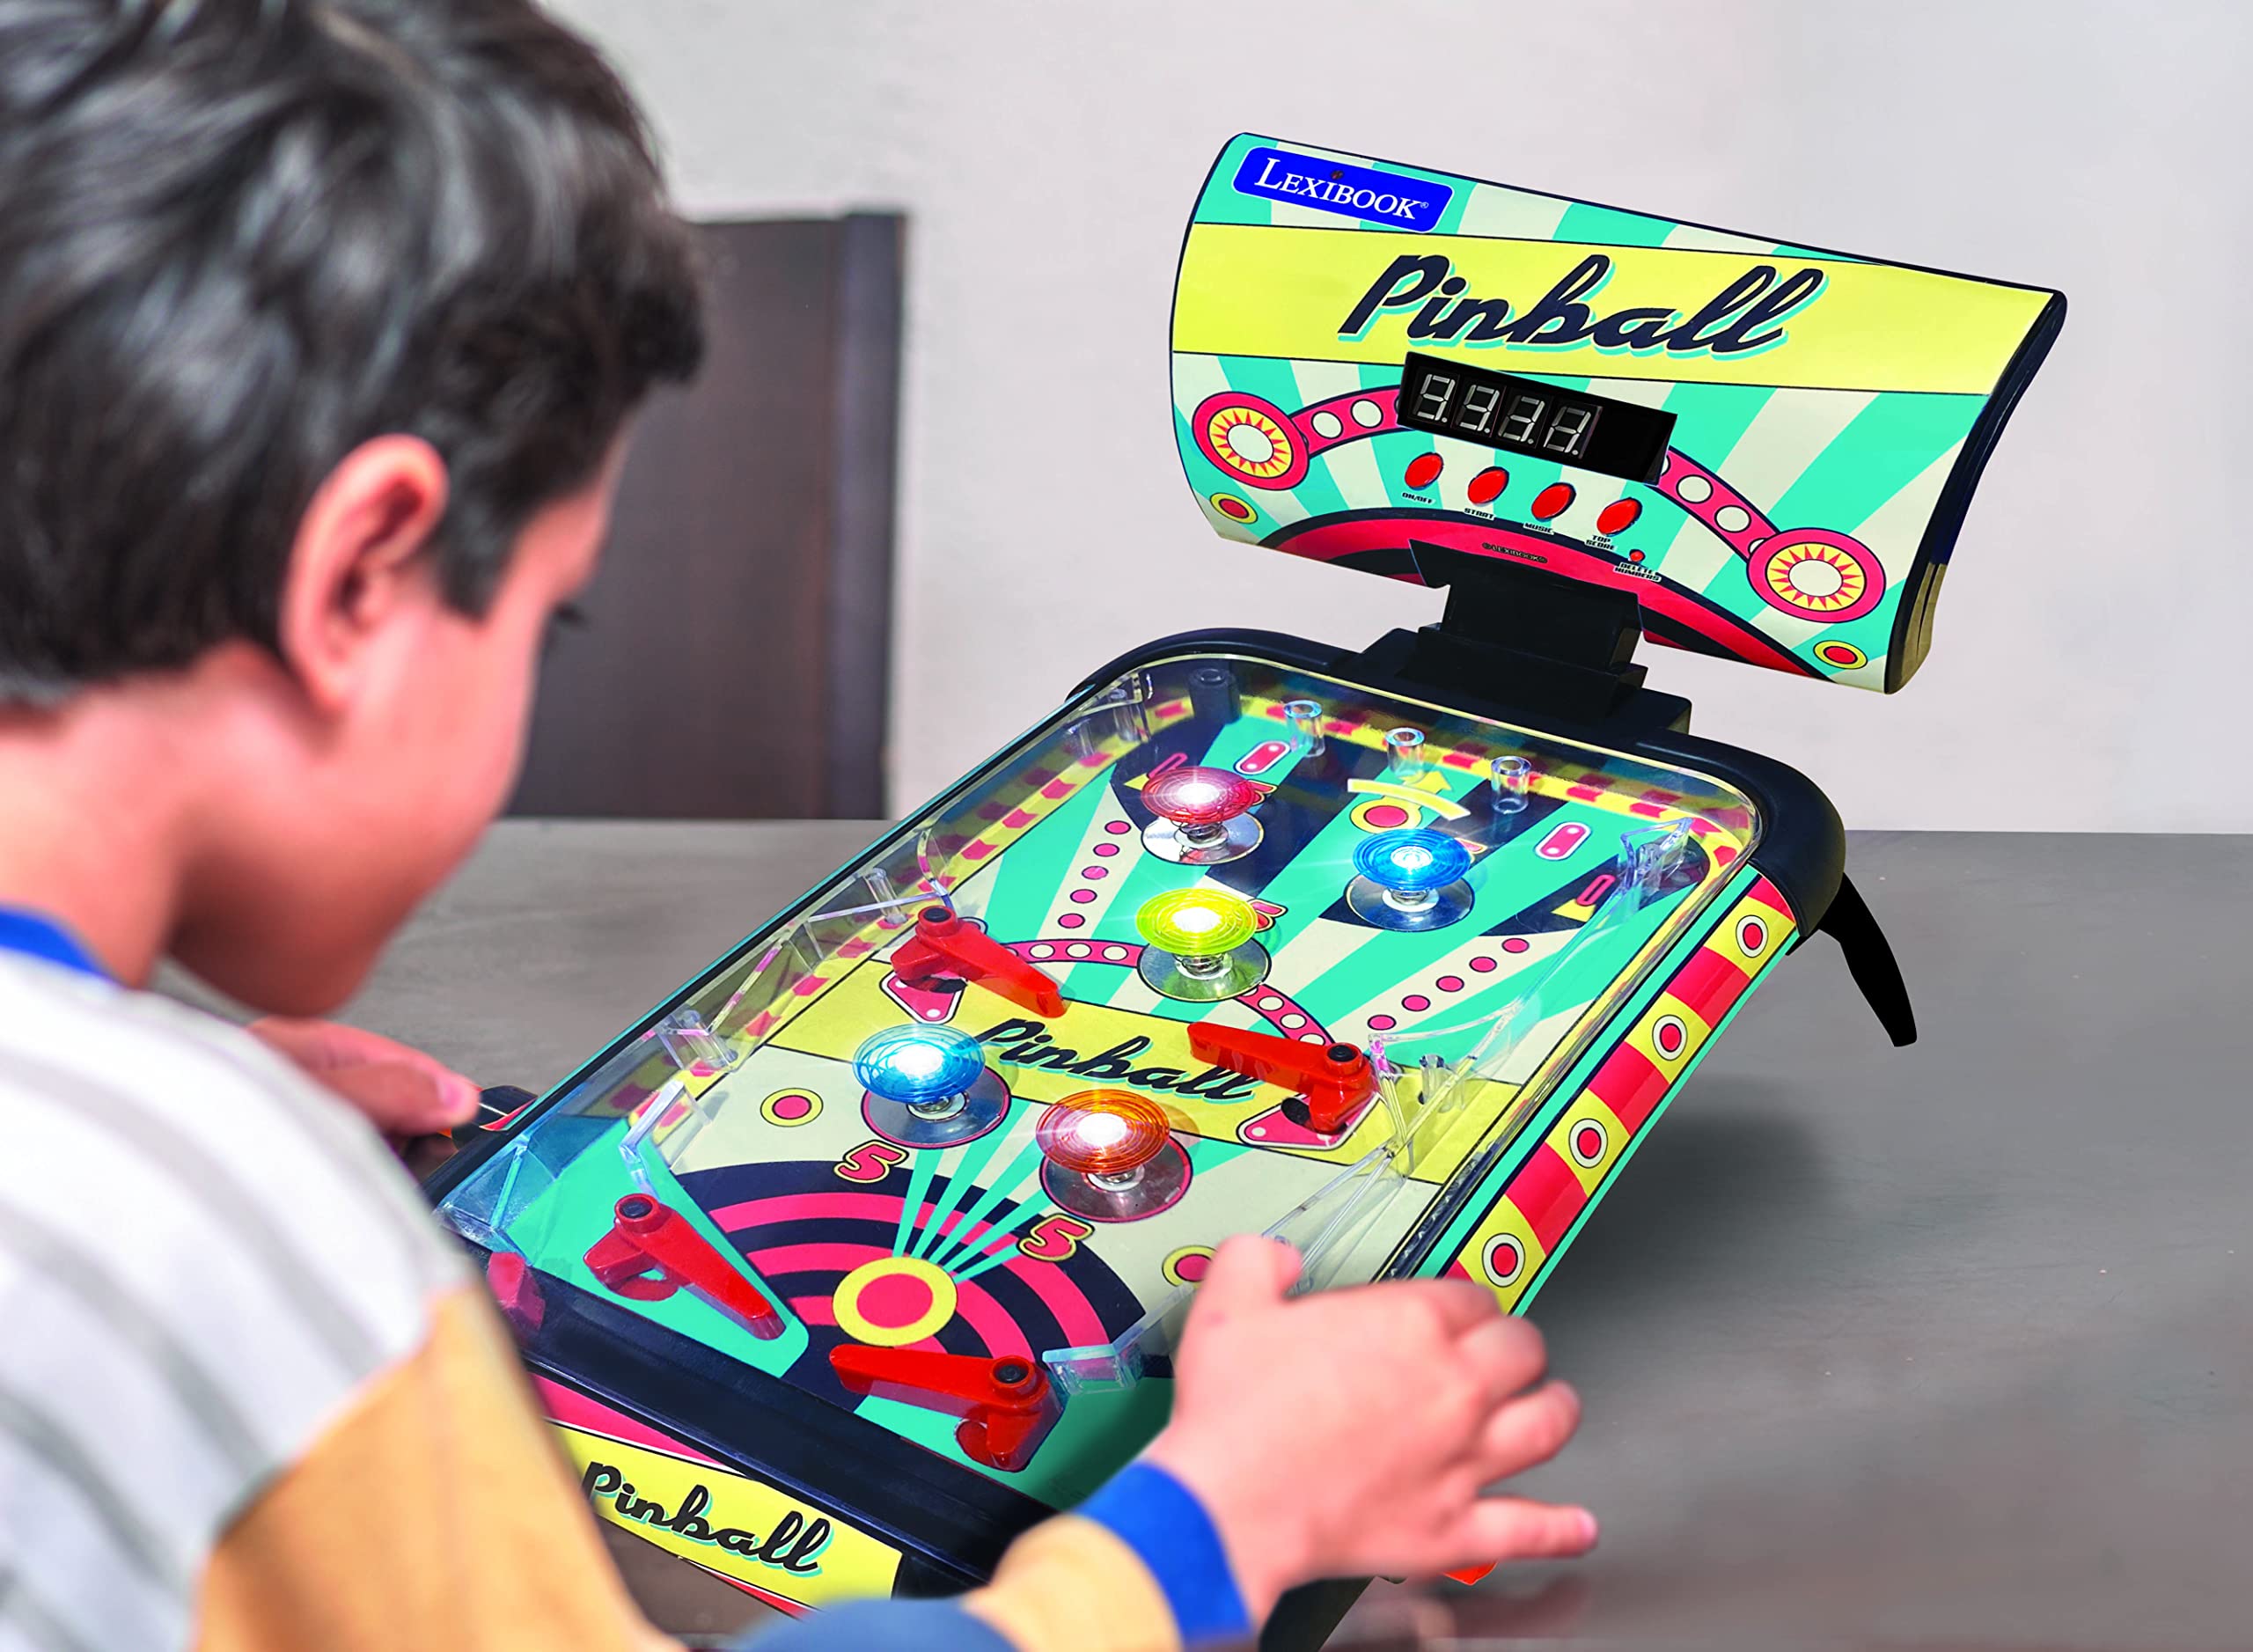 LEXiBOOK Table Electronic Pinball, Action and Reflex Game for Children and Family, LCD Screen, Light and Sound Effects, JG610